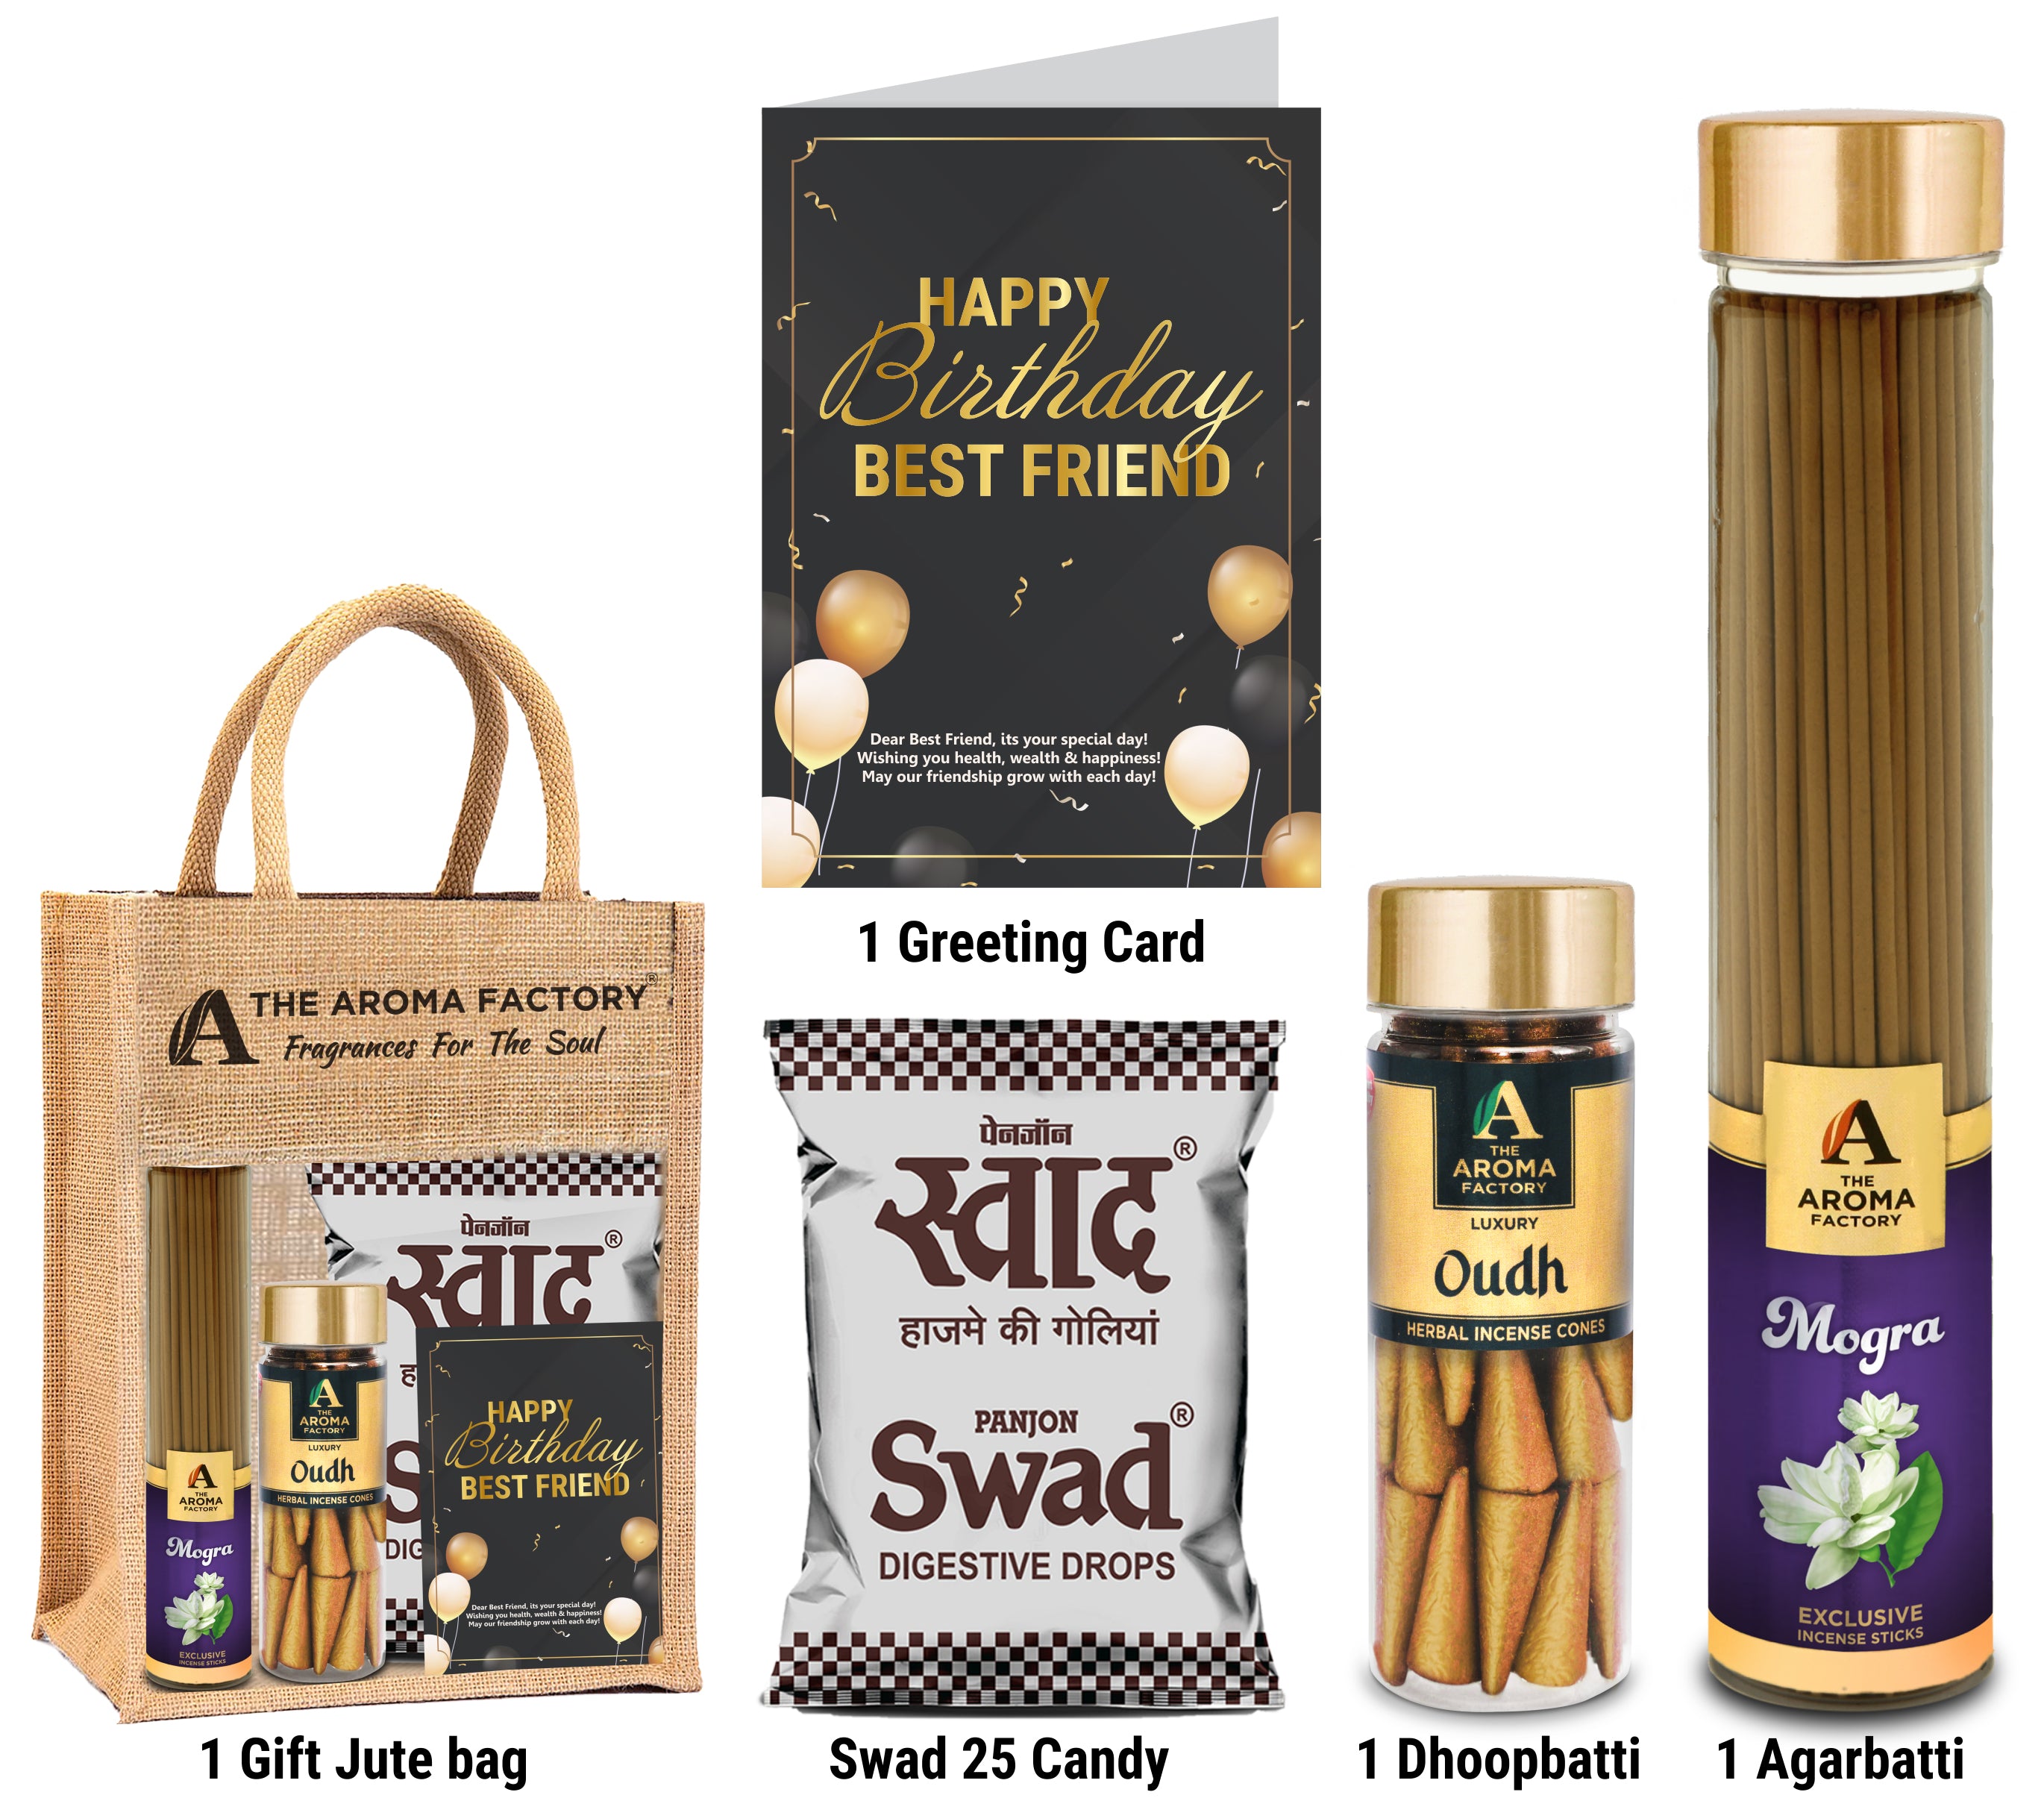 The Aroma Factory Happy Birthday with Card (25 Swad Candy, Mogra Agarbatti Bottle, Oudh Cone) in Jute Bag